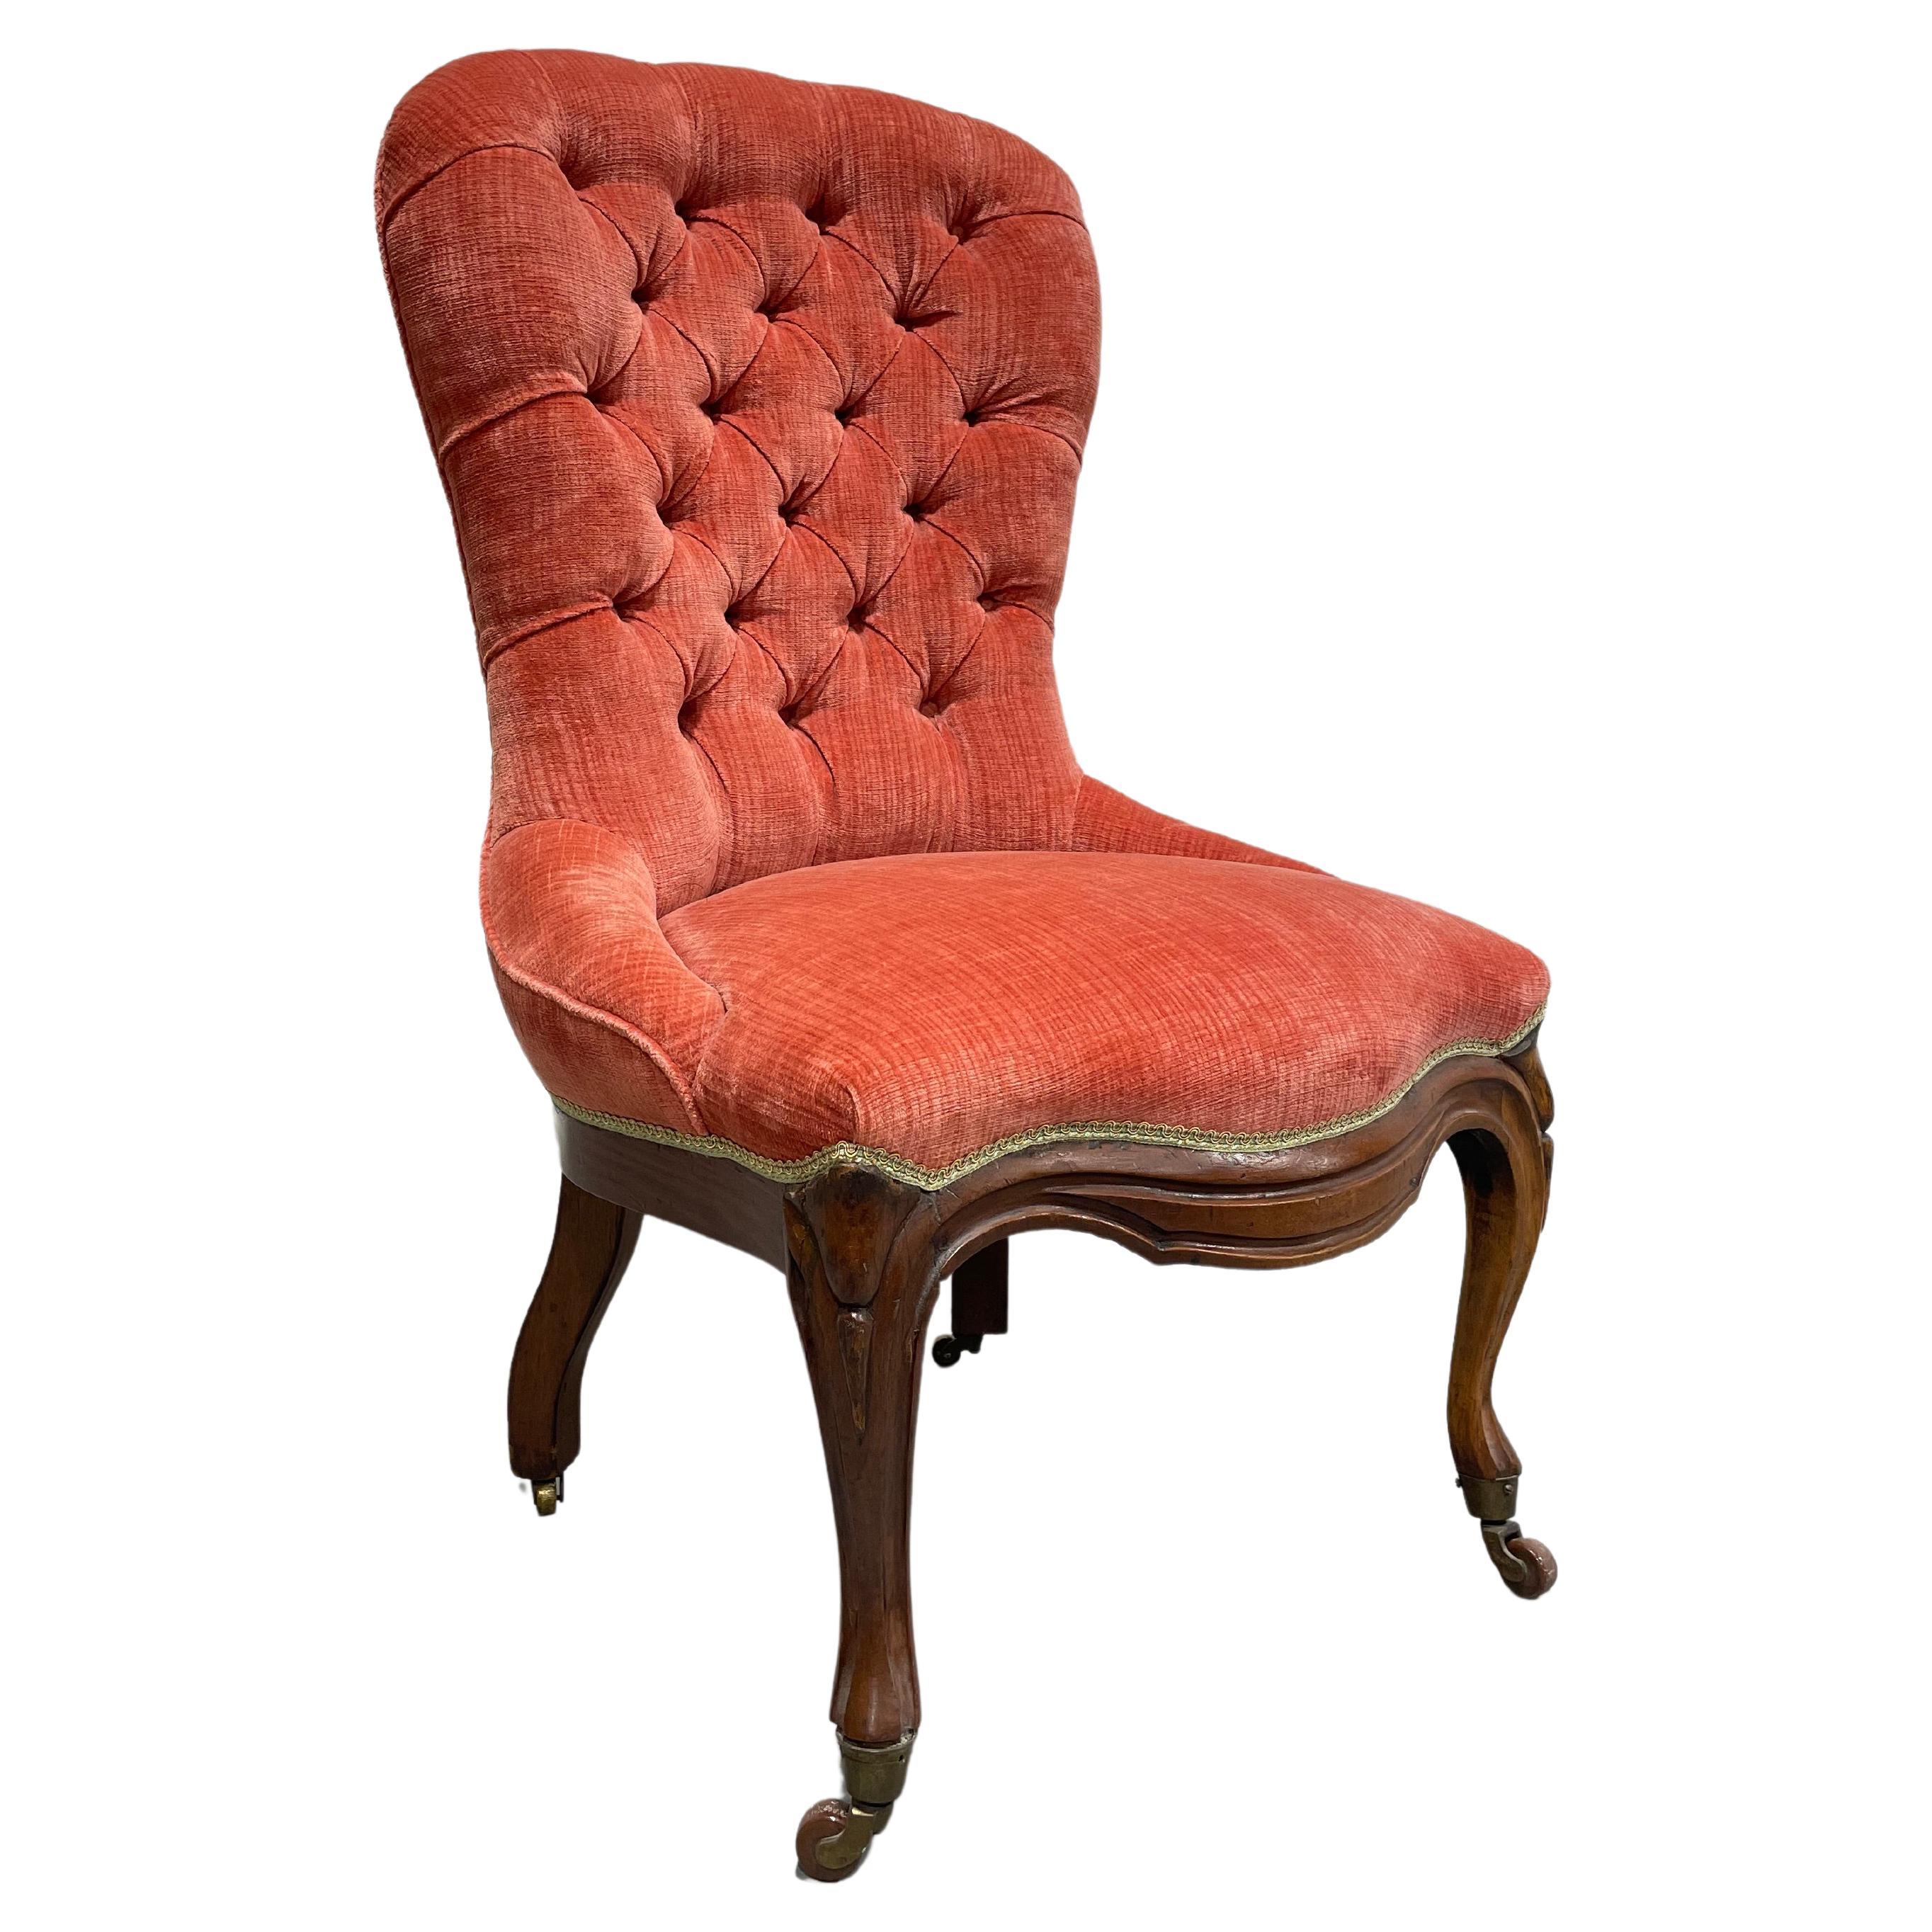 Antique TUFTED Pink Victorian Slipper SIDE CHAIR For Sale